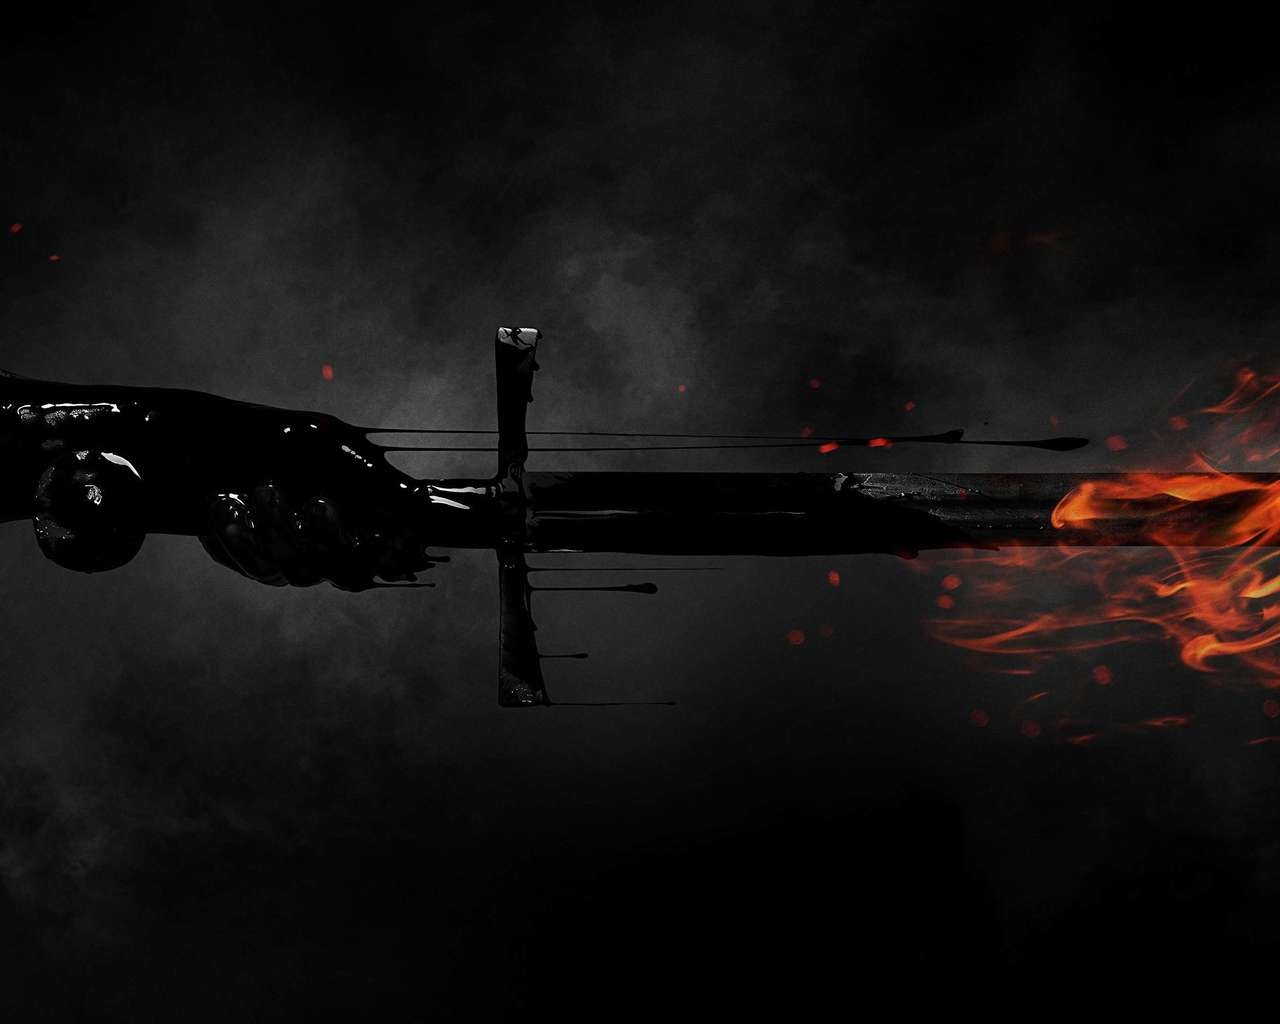 The Last Witch Hunter Sword for 1280 x 1024 resolution